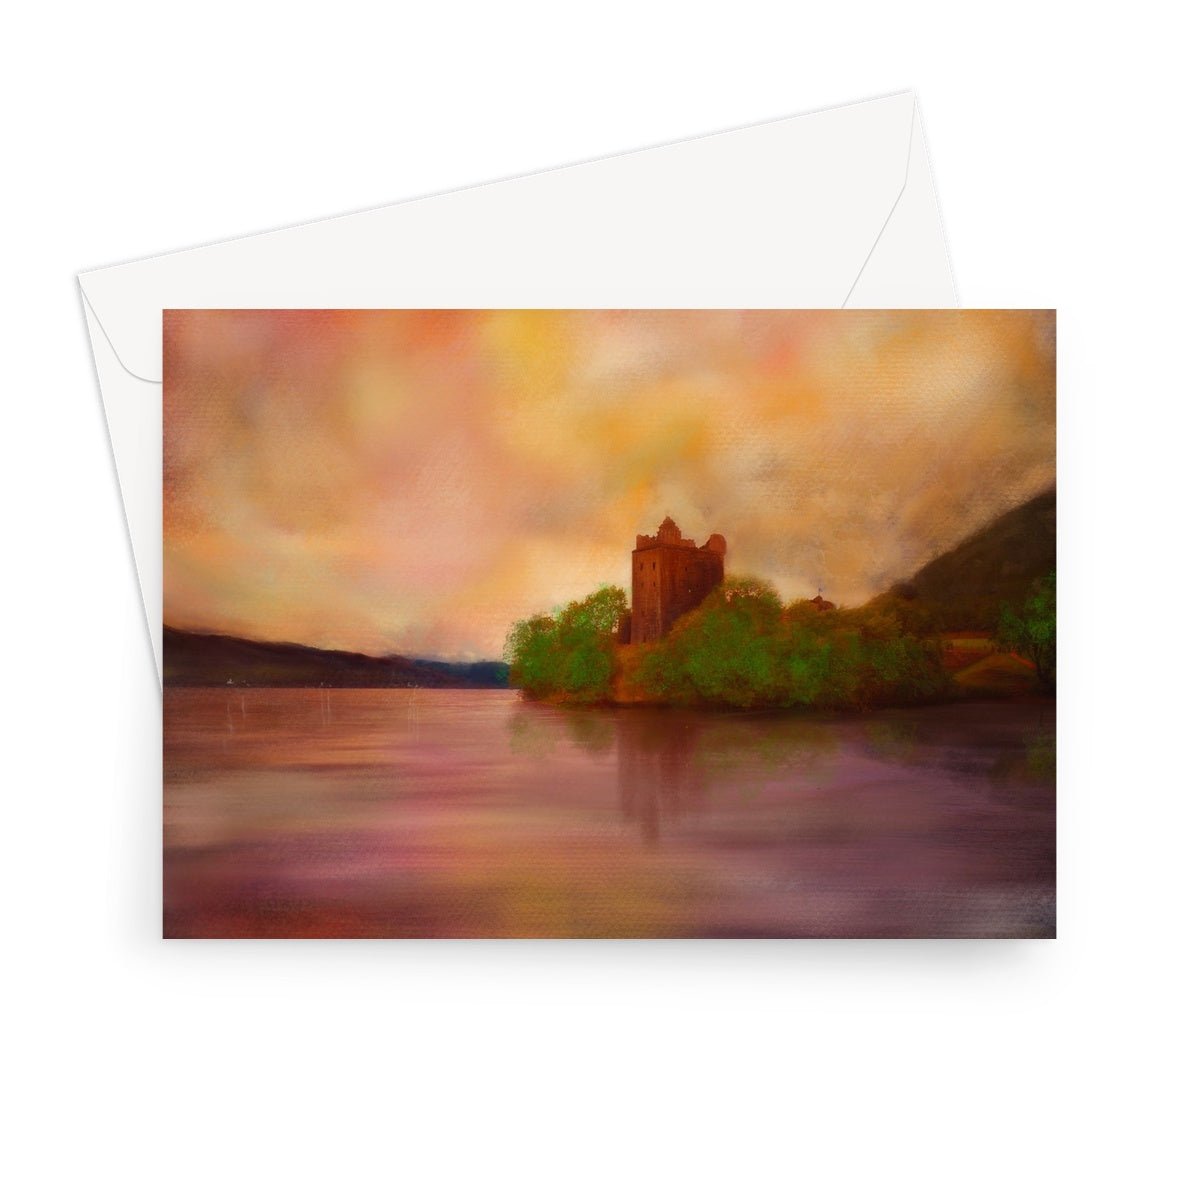 Urquhart Castle Art Gifts Greeting Card-Greetings Cards-Scottish Castles Art Gallery-7"x5"-10 Cards-Paintings, Prints, Homeware, Art Gifts From Scotland By Scottish Artist Kevin Hunter